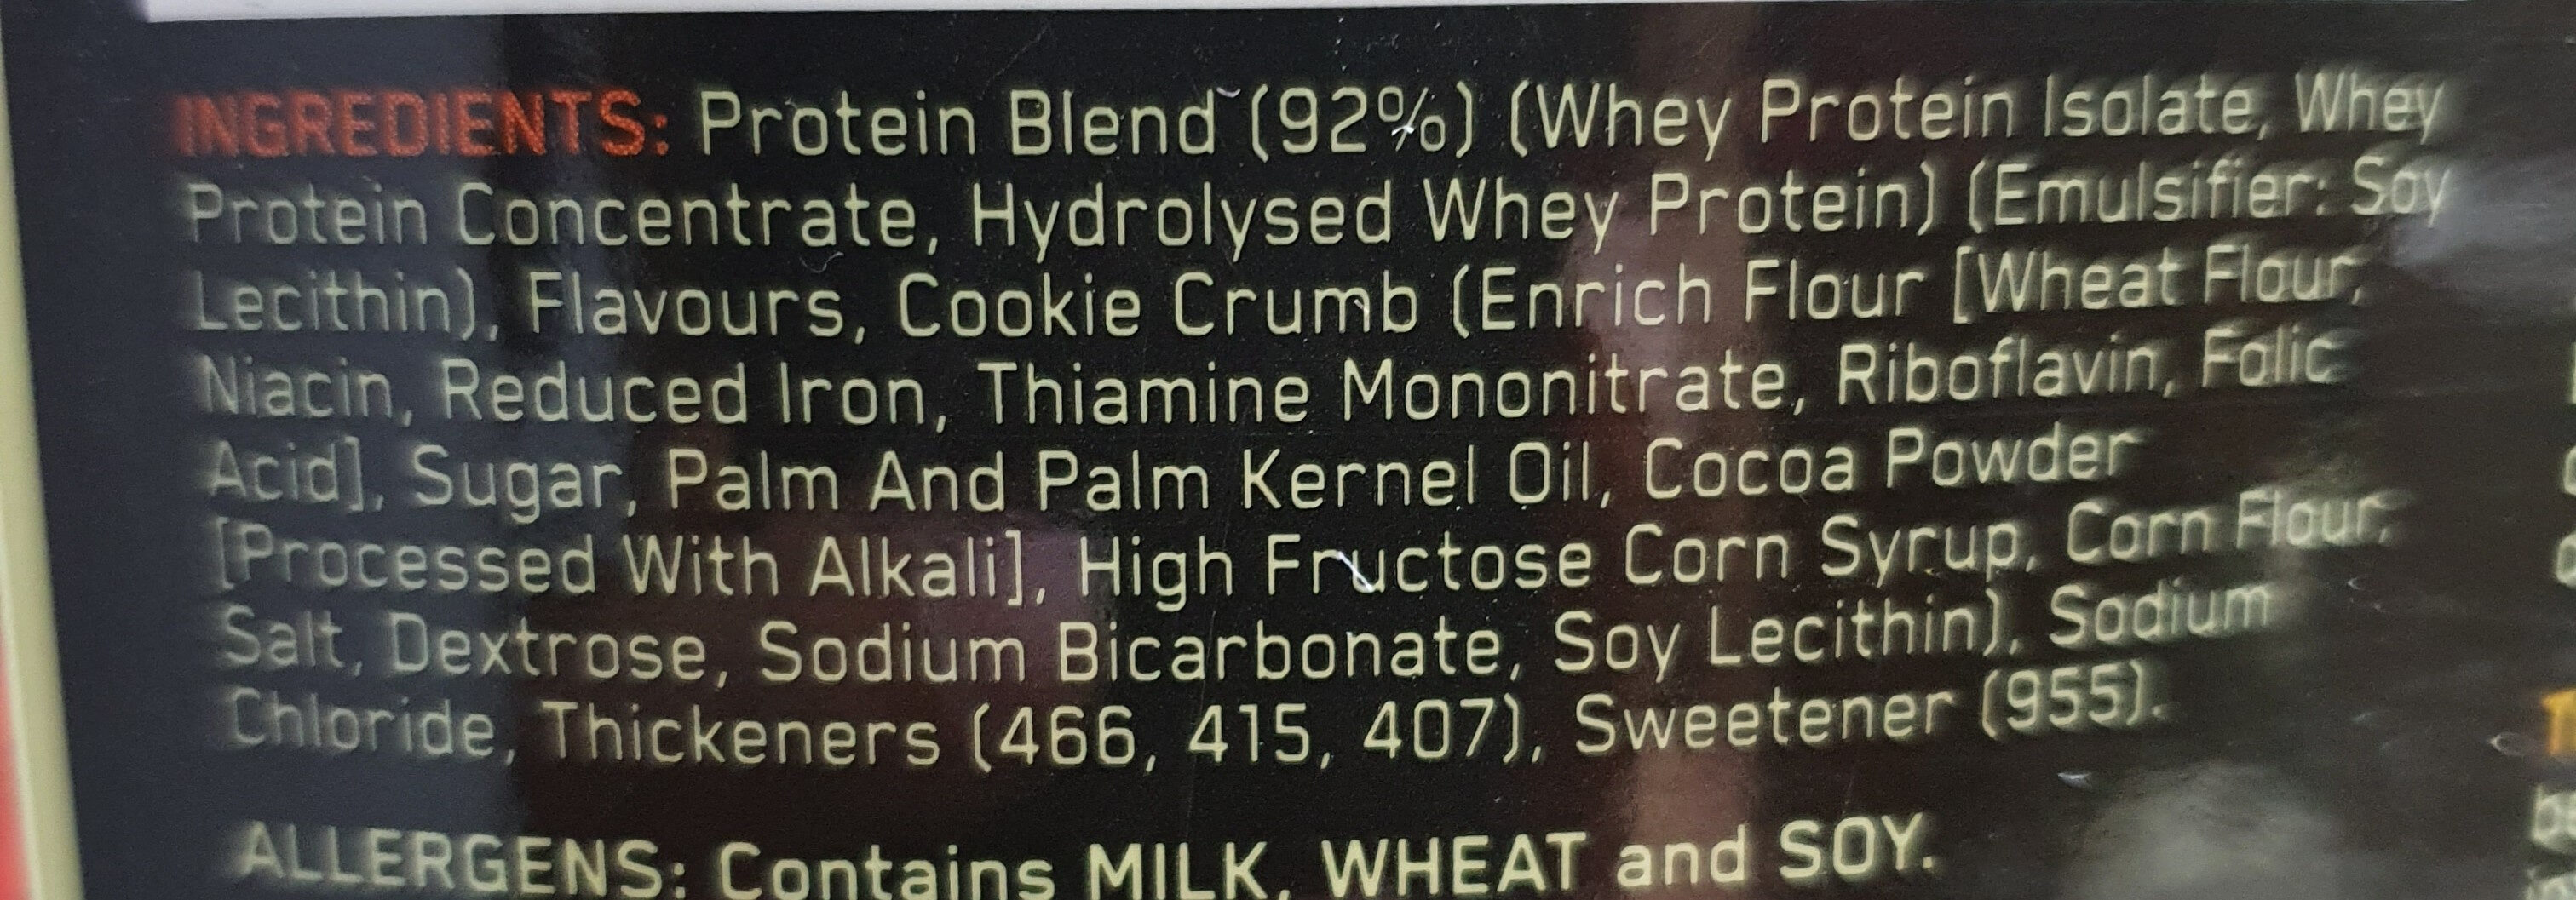 ON Gold Standard 100% Whey Protein - Ingredients